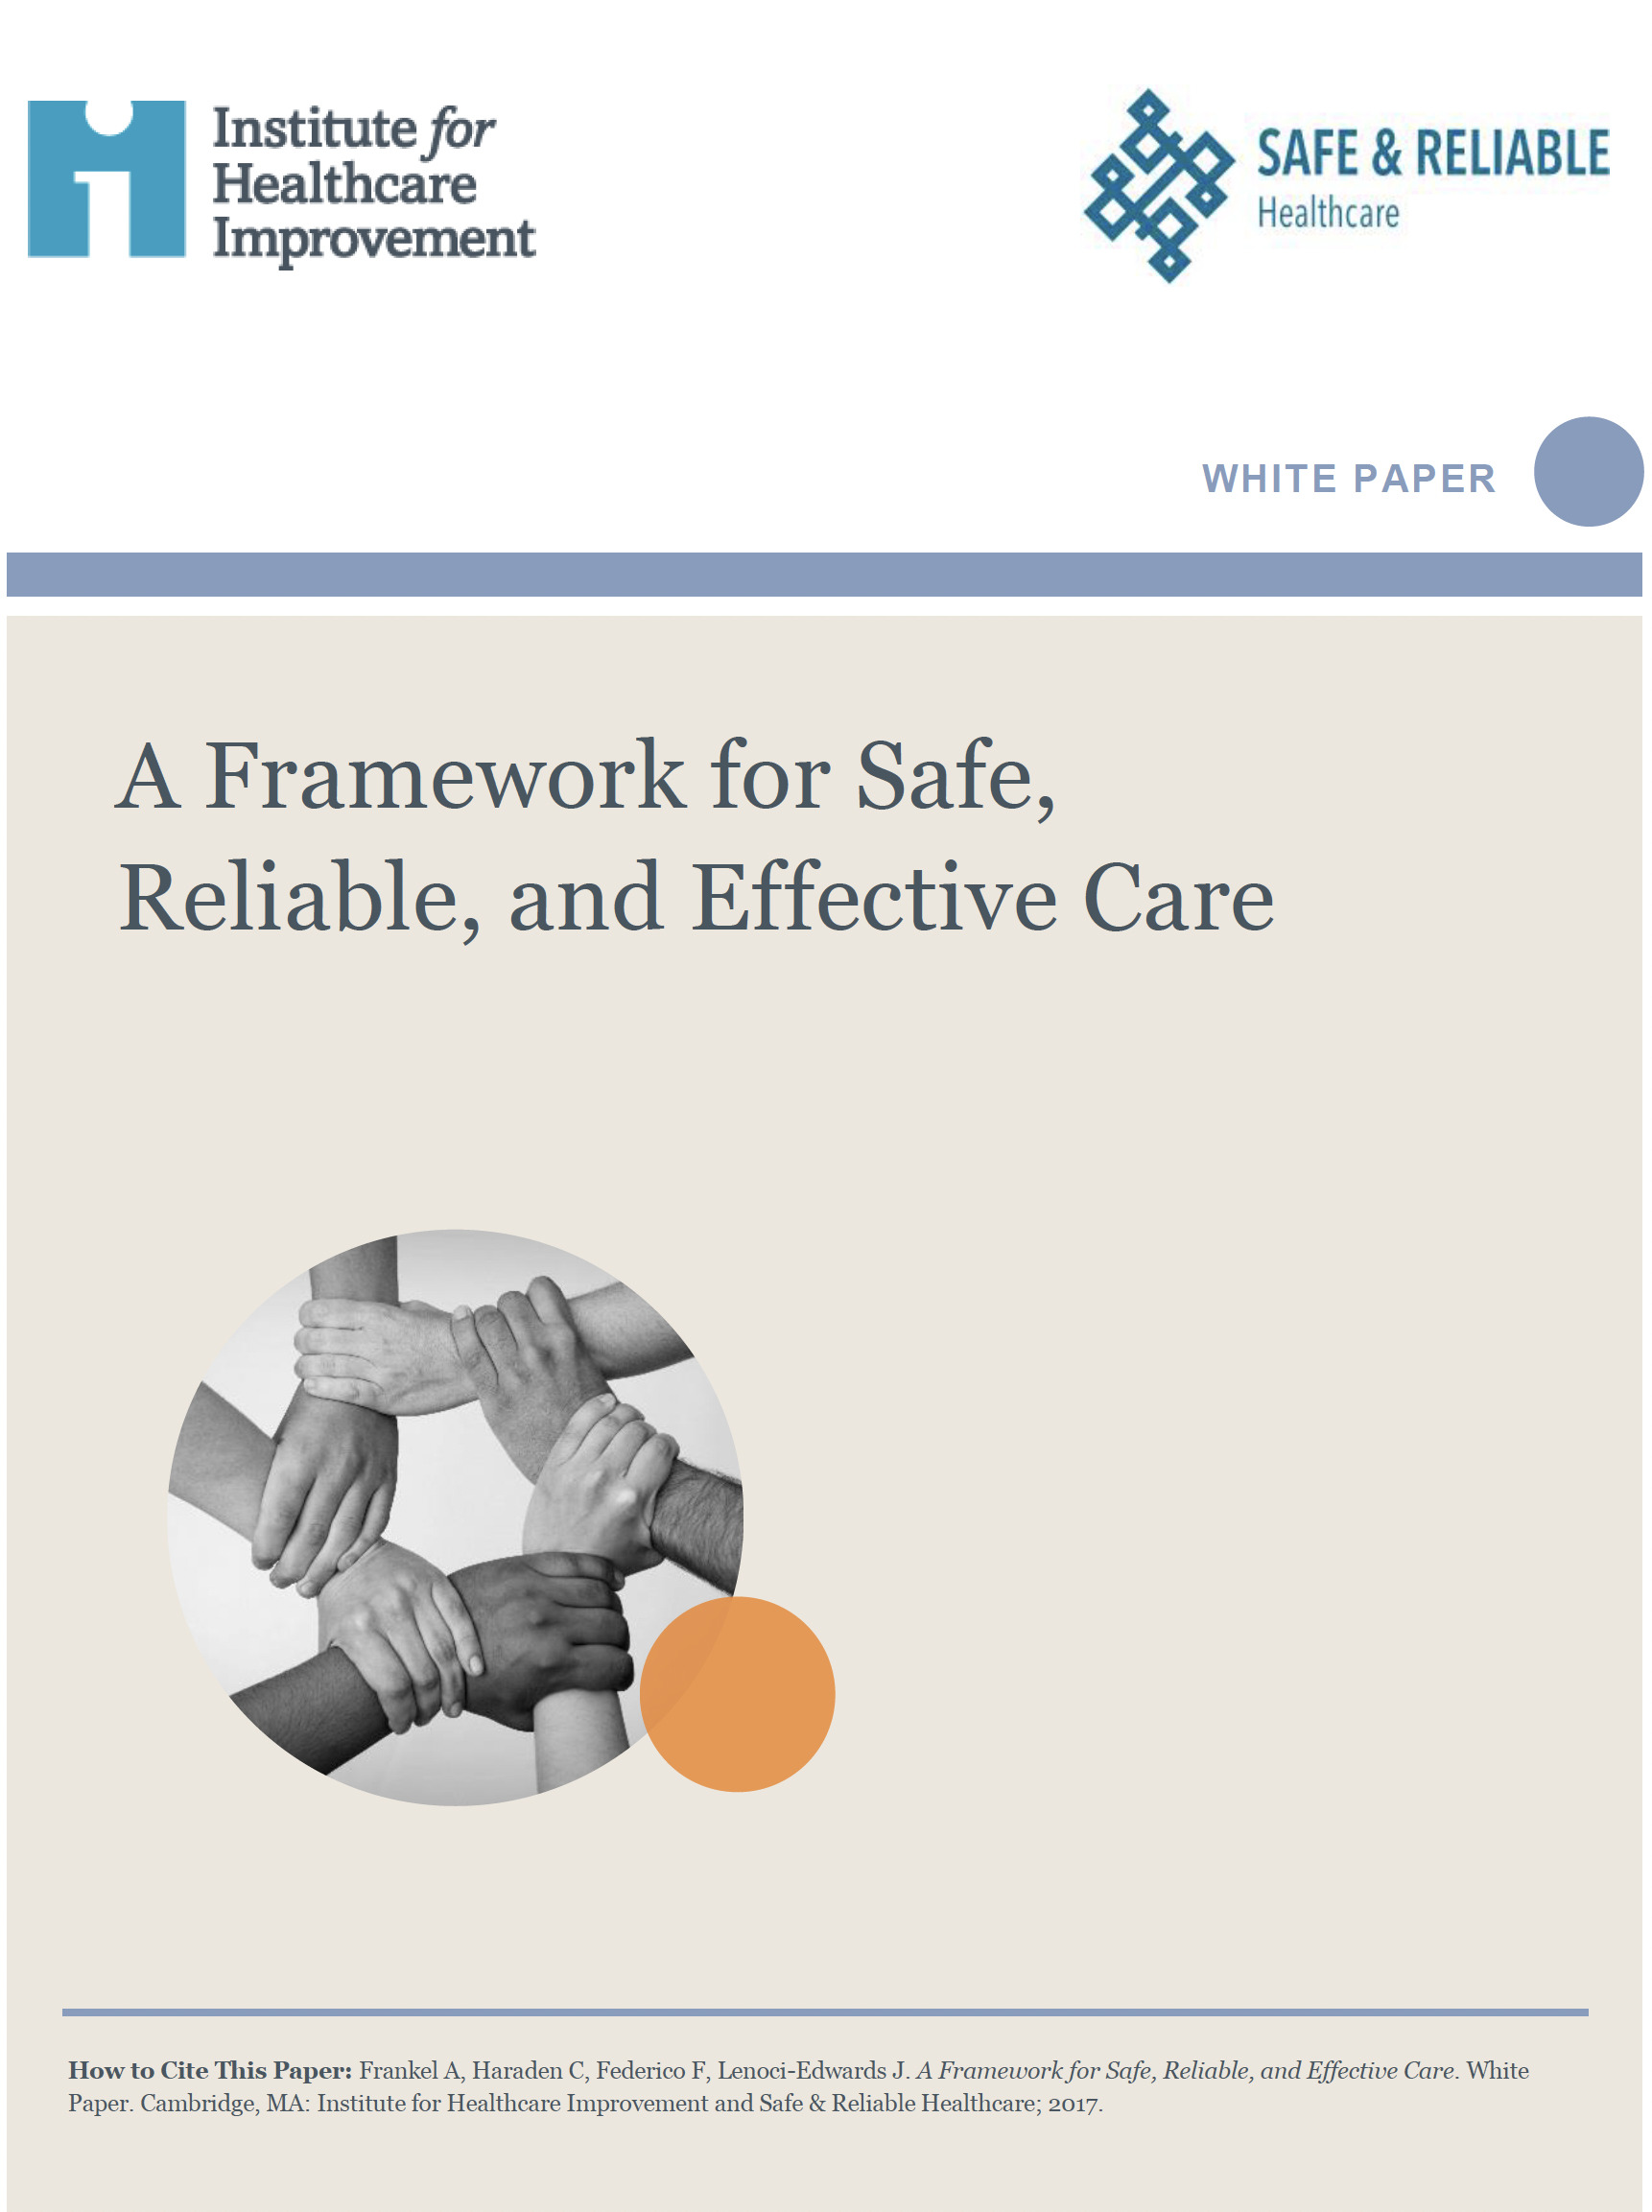 Cover of the whitepaper from IHI on A Framework for Safe, Reliable, and Effective Care